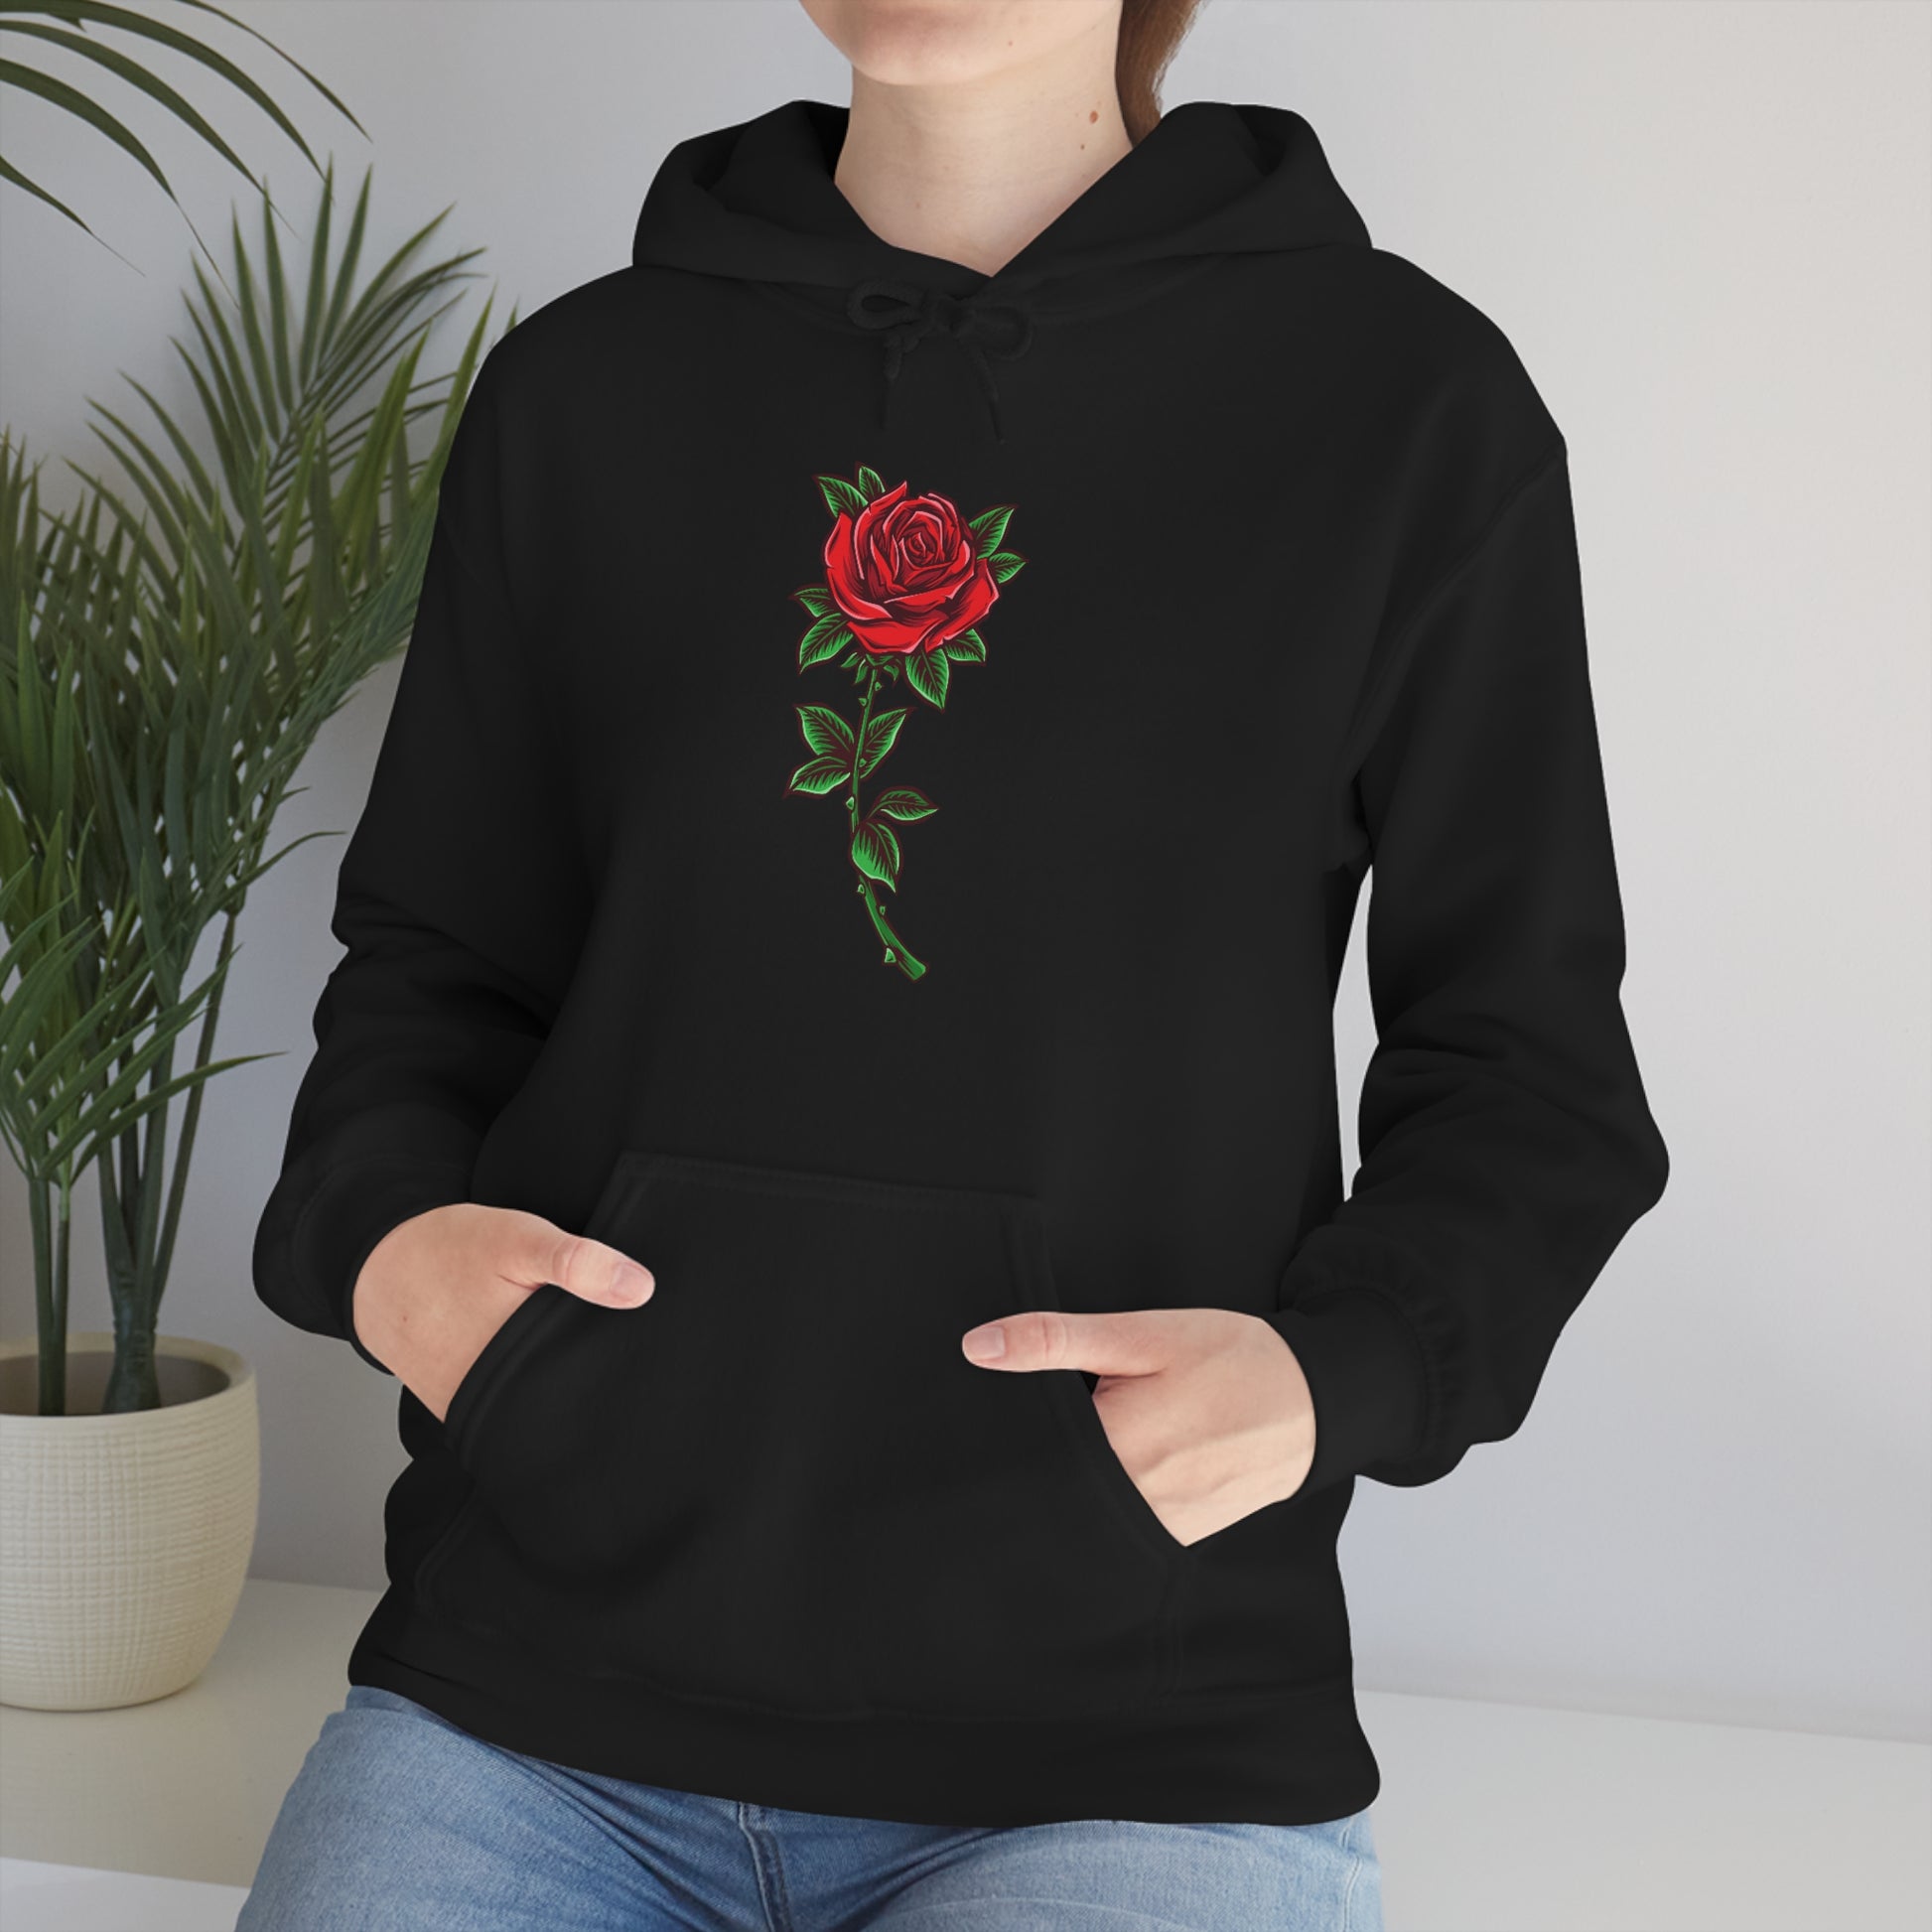 Red Rose Hoodie, Flowers Floral Pullover Men Women Adult Aesthetic Graphic Cotton Punk Goth Hooded Sweatshirt with Pockets Starcove Fashion